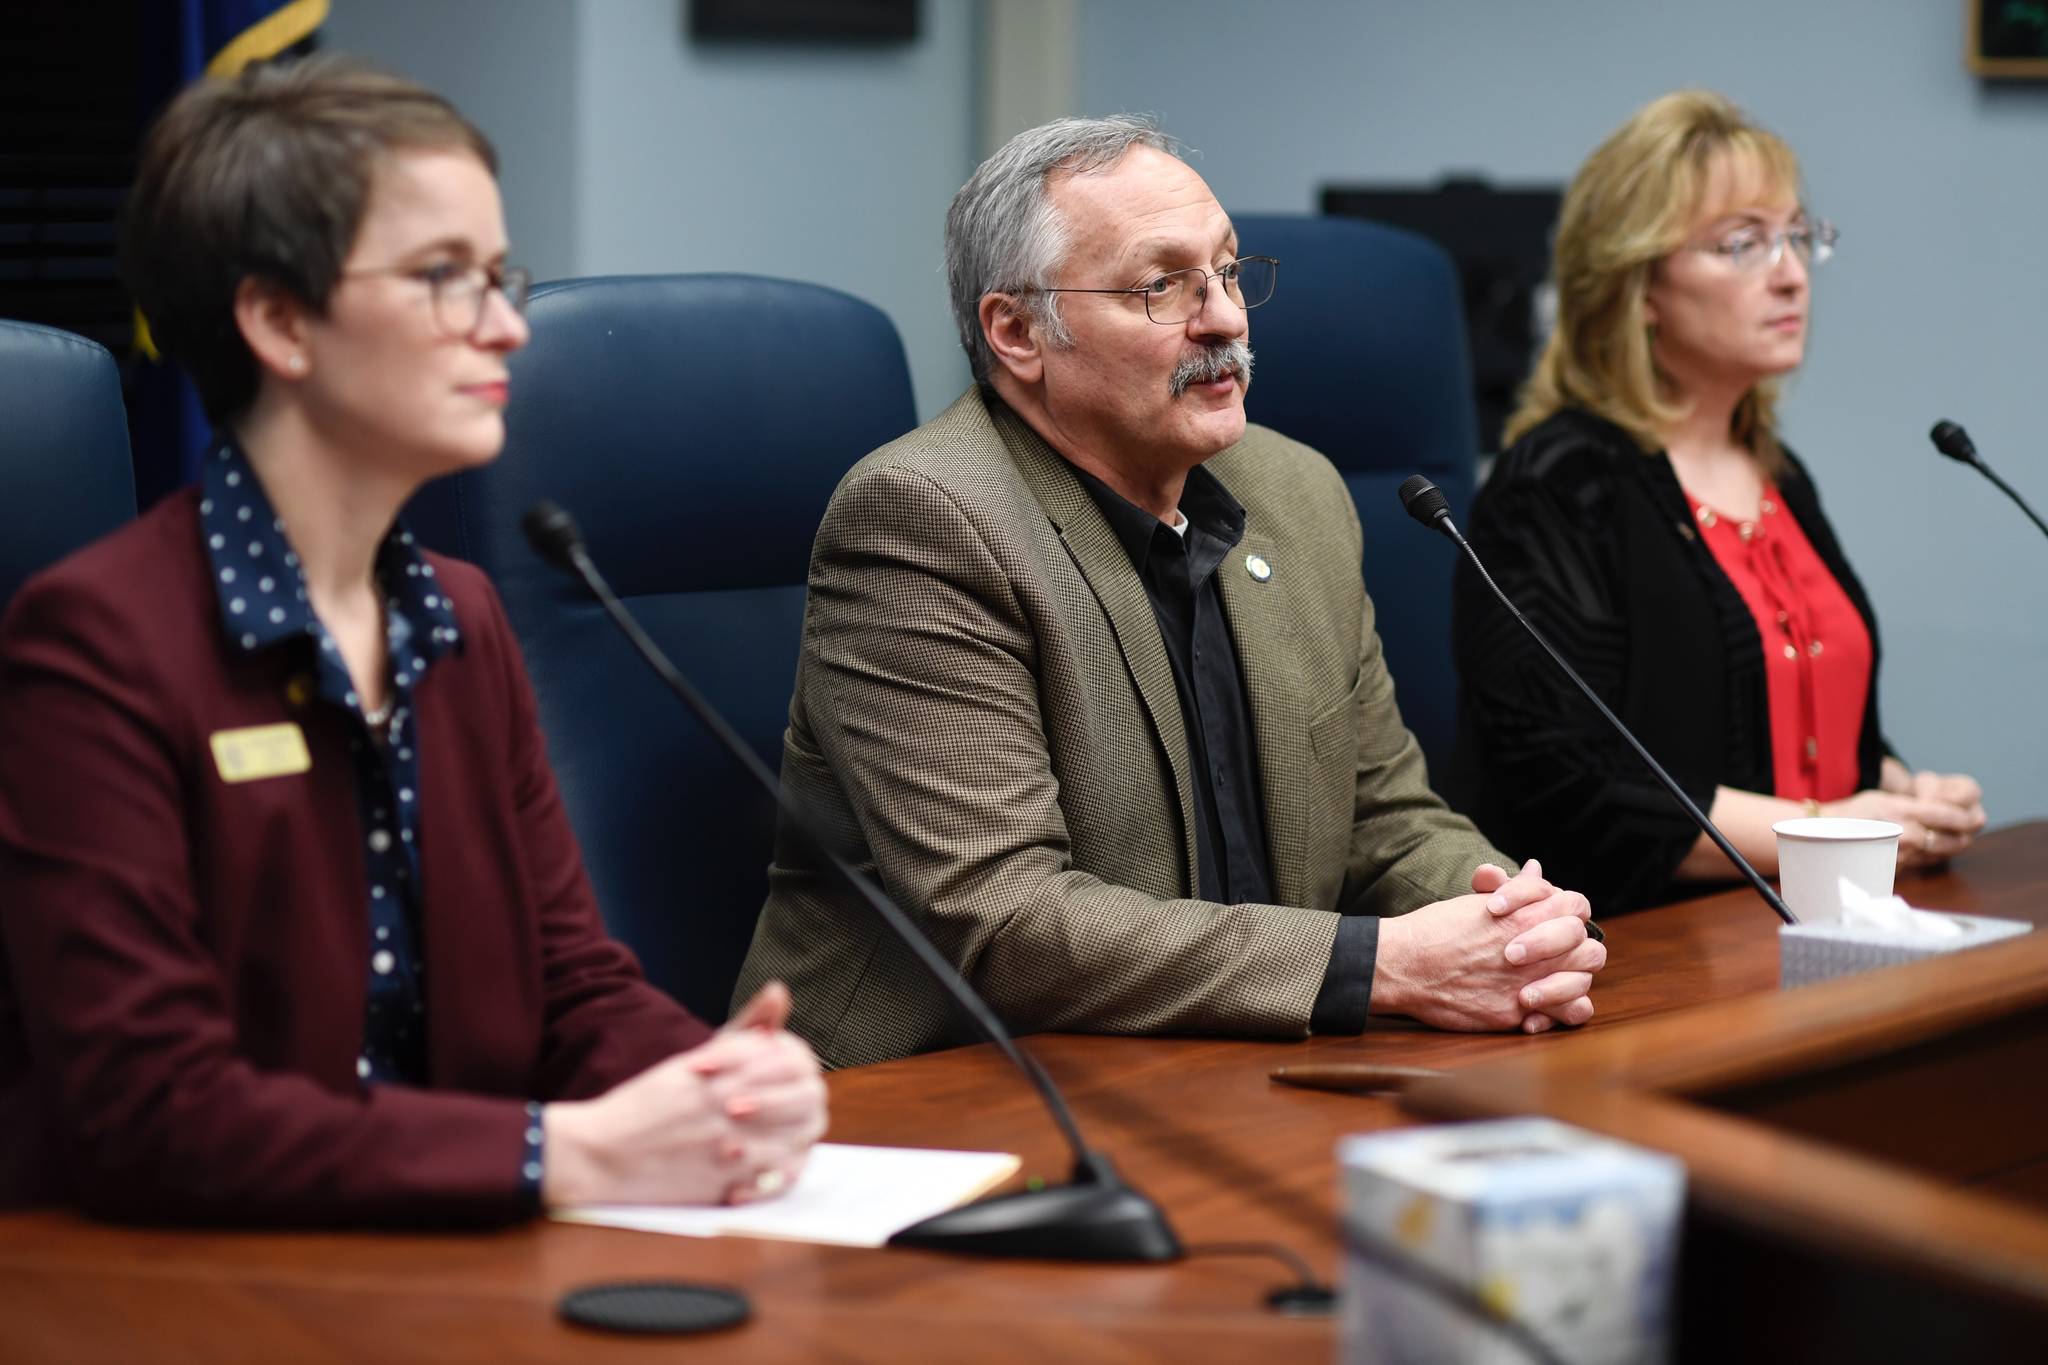 Rep. David Talerico, R-Healy, speaks during a press conference with Rep. Sarah Vance, R-Homer, left, and Rep. Colleen Sullivan-Leonard, R-Wasilla, at the Capitol on Tuesday, Jan. 29, 2019. (Michael Penn | Juneau Empire)